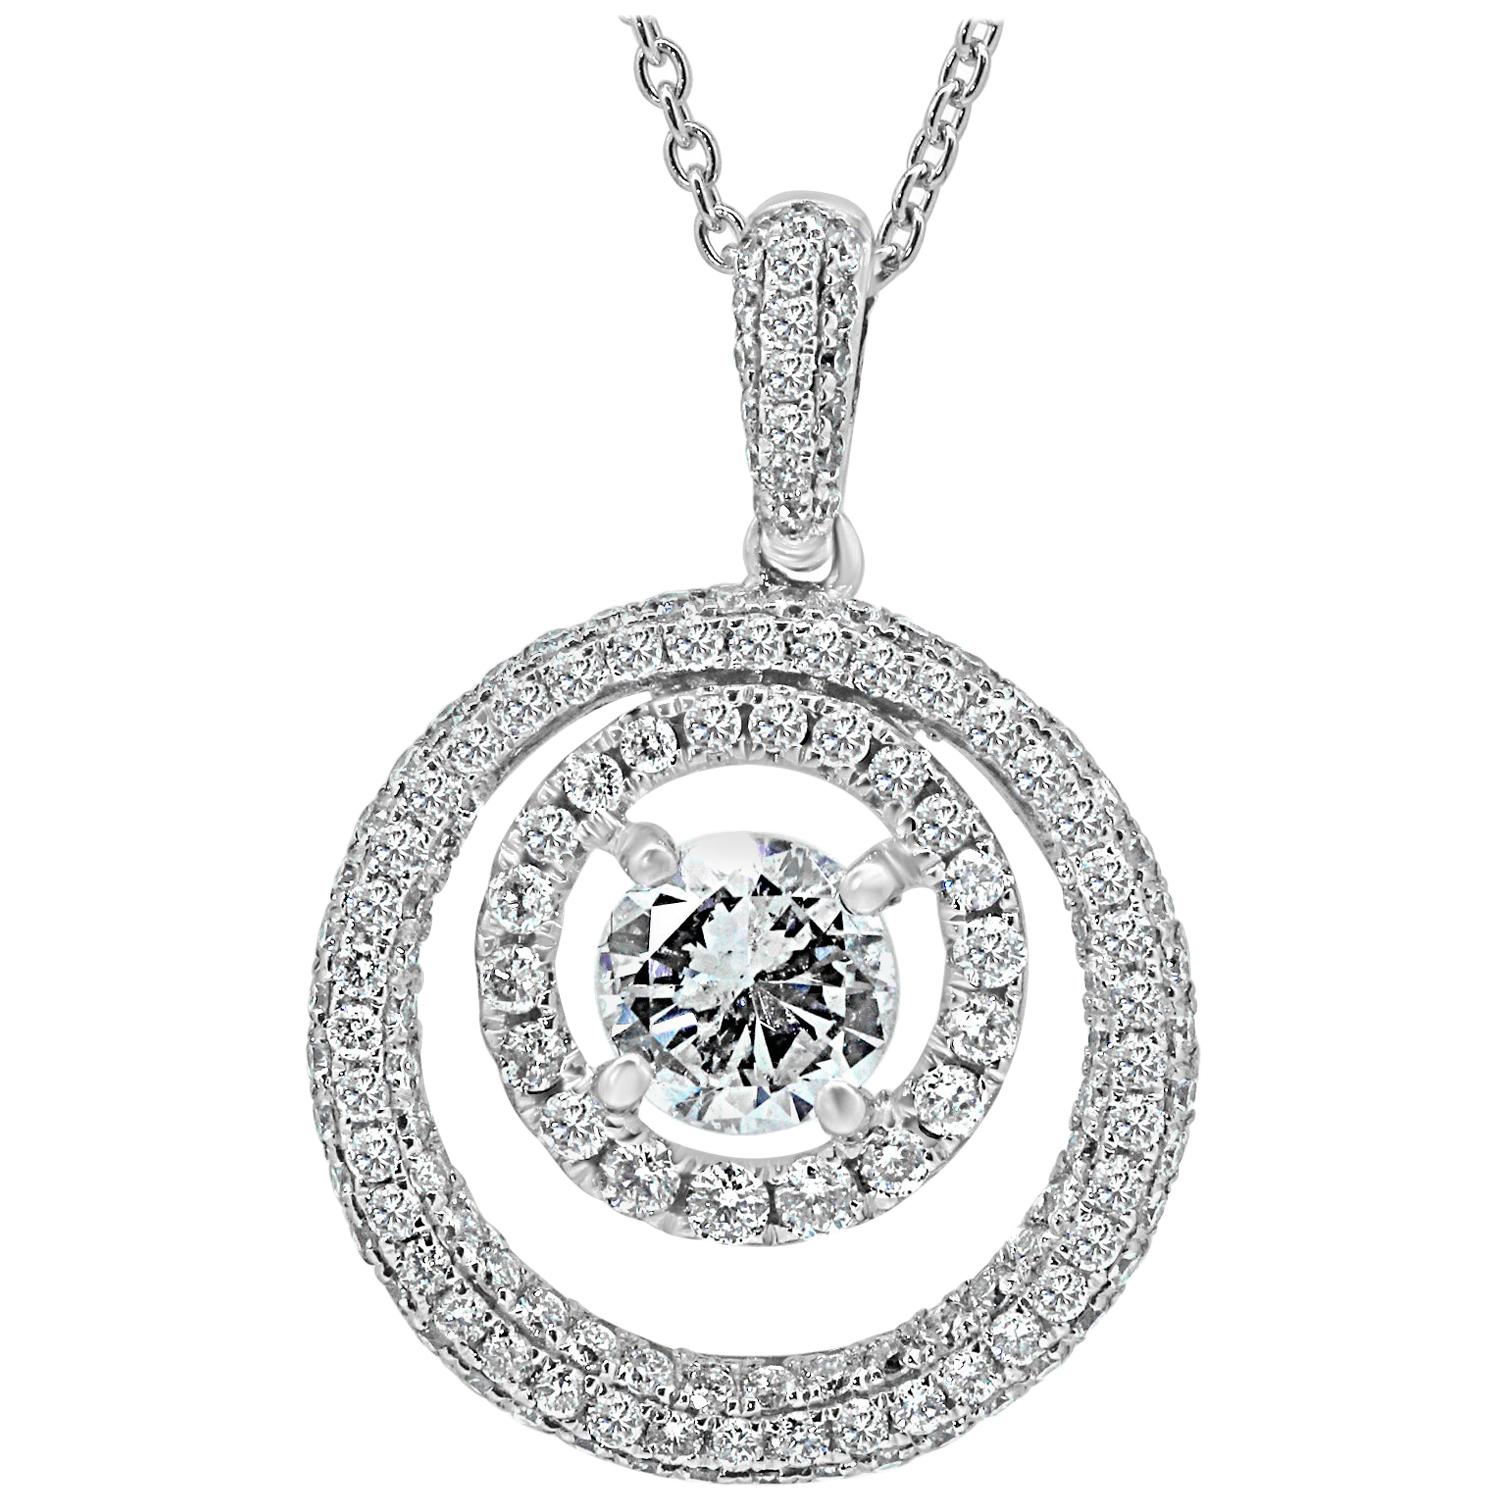 2.05 Carat Total Weight Round Diamond Double Halo Gold Pendant Chain Necklace